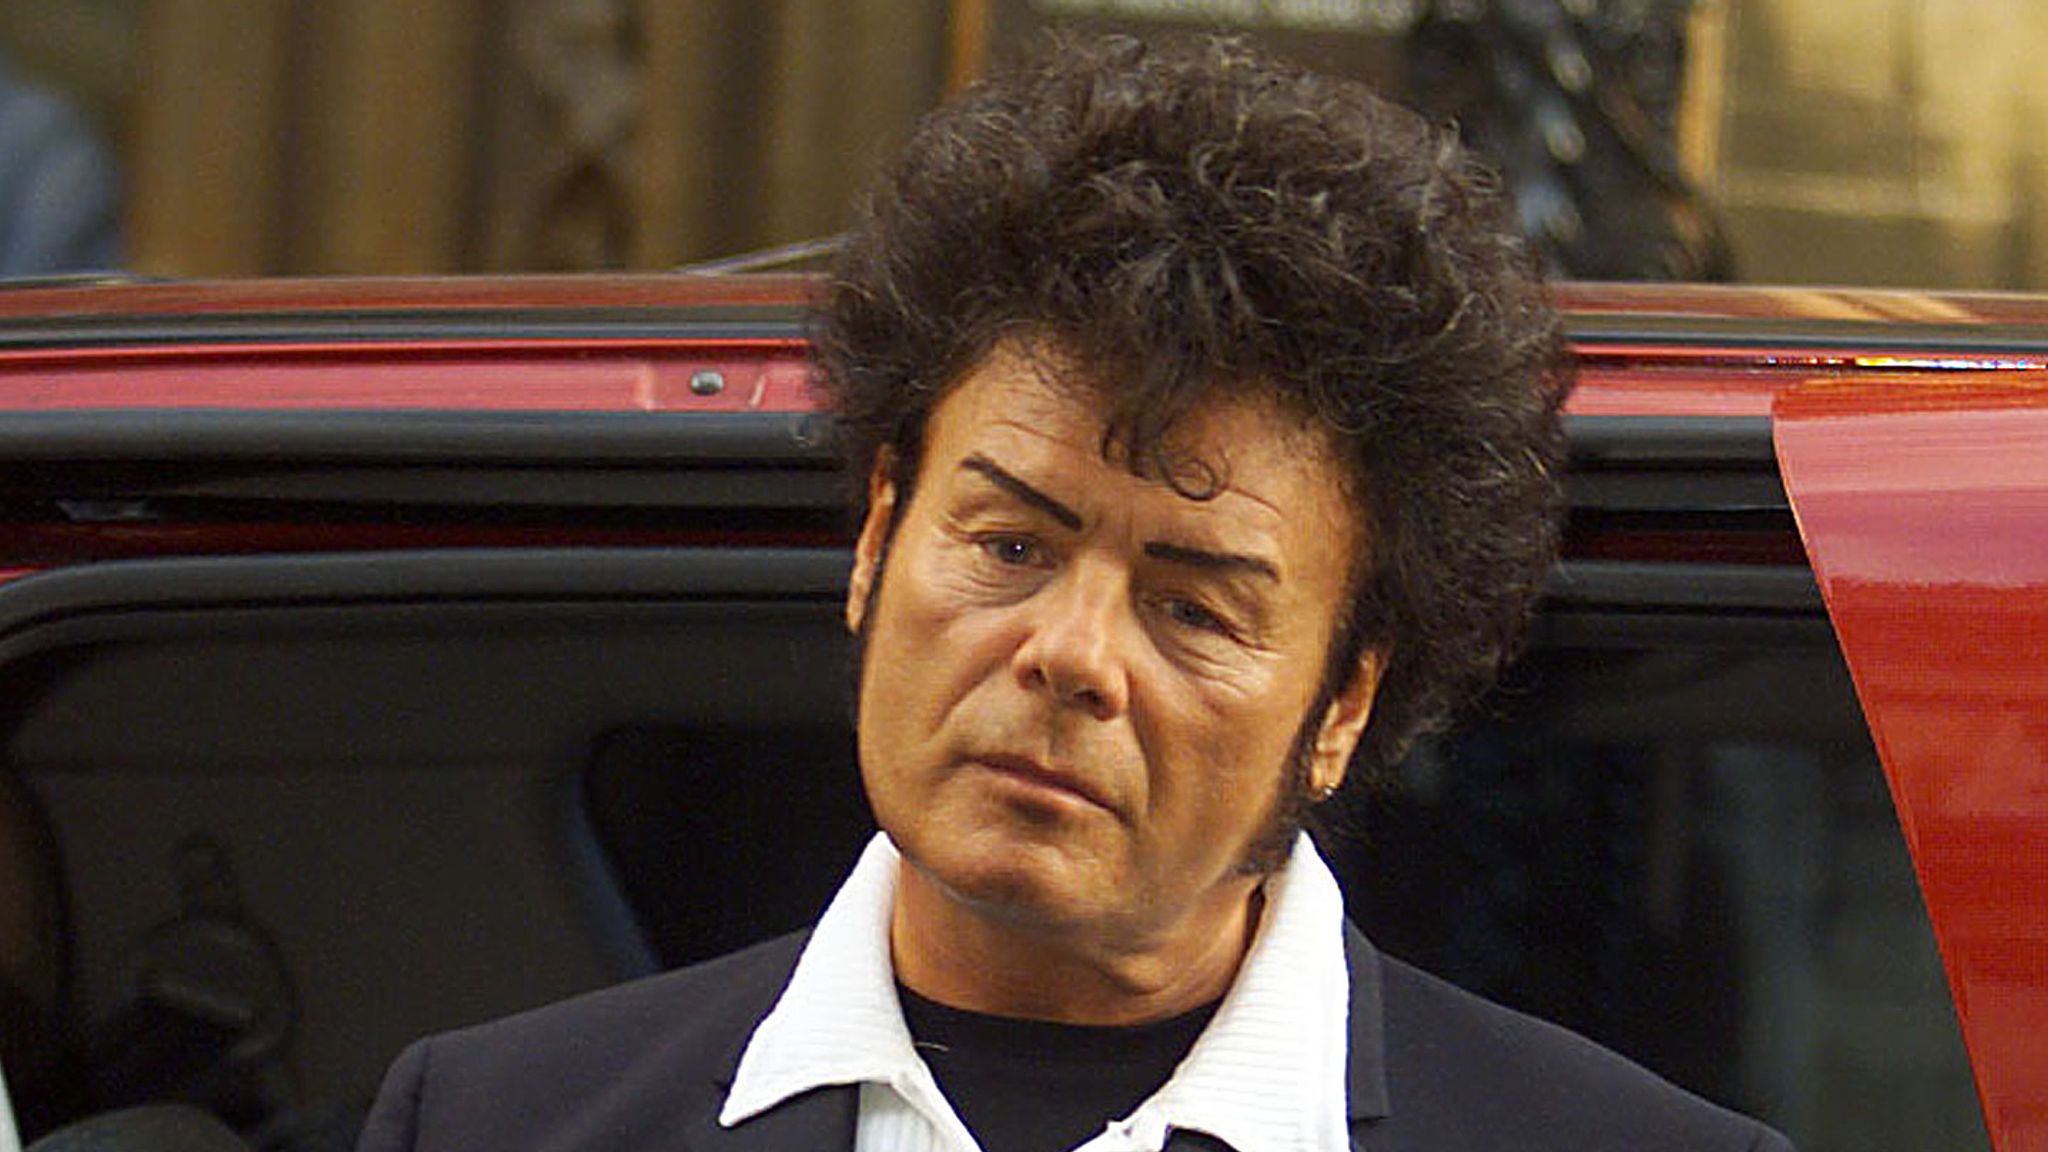 Gary Glitter Freed From Prison After Serving Half Of Sentence For Abusing Girls Uk News Sky News 0745